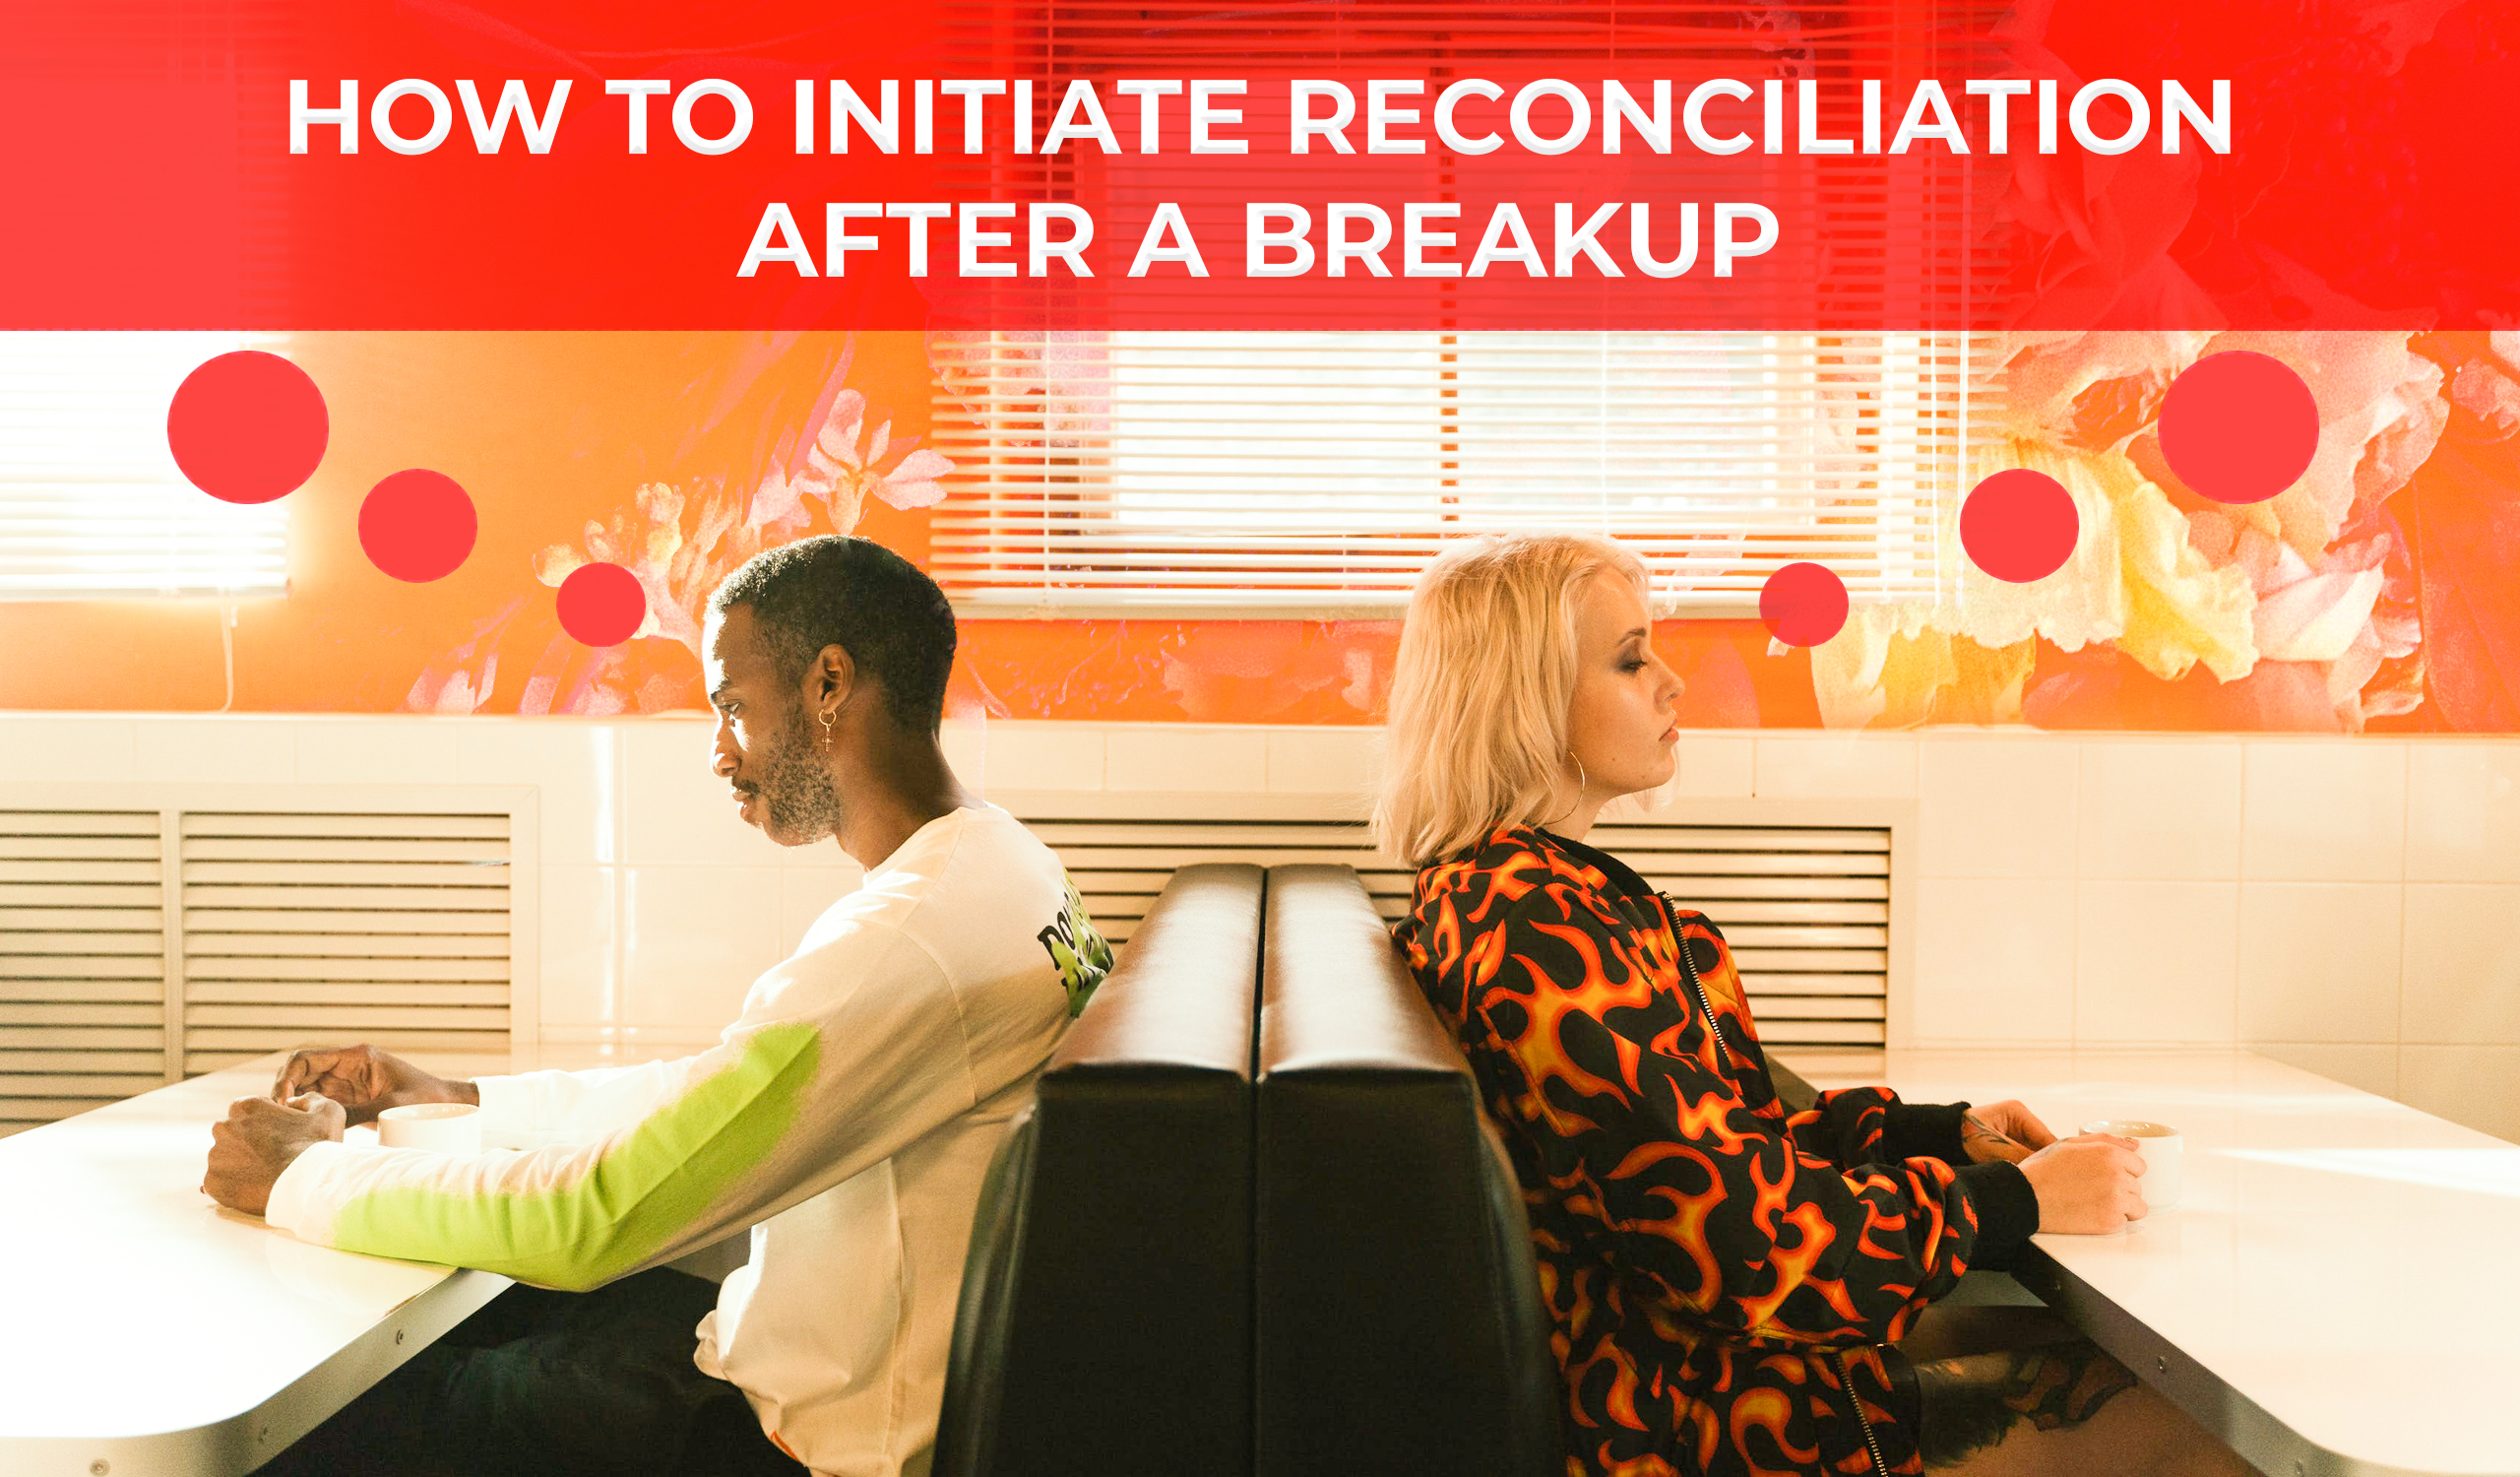 How to Initiate Reconciliation after a Breakup